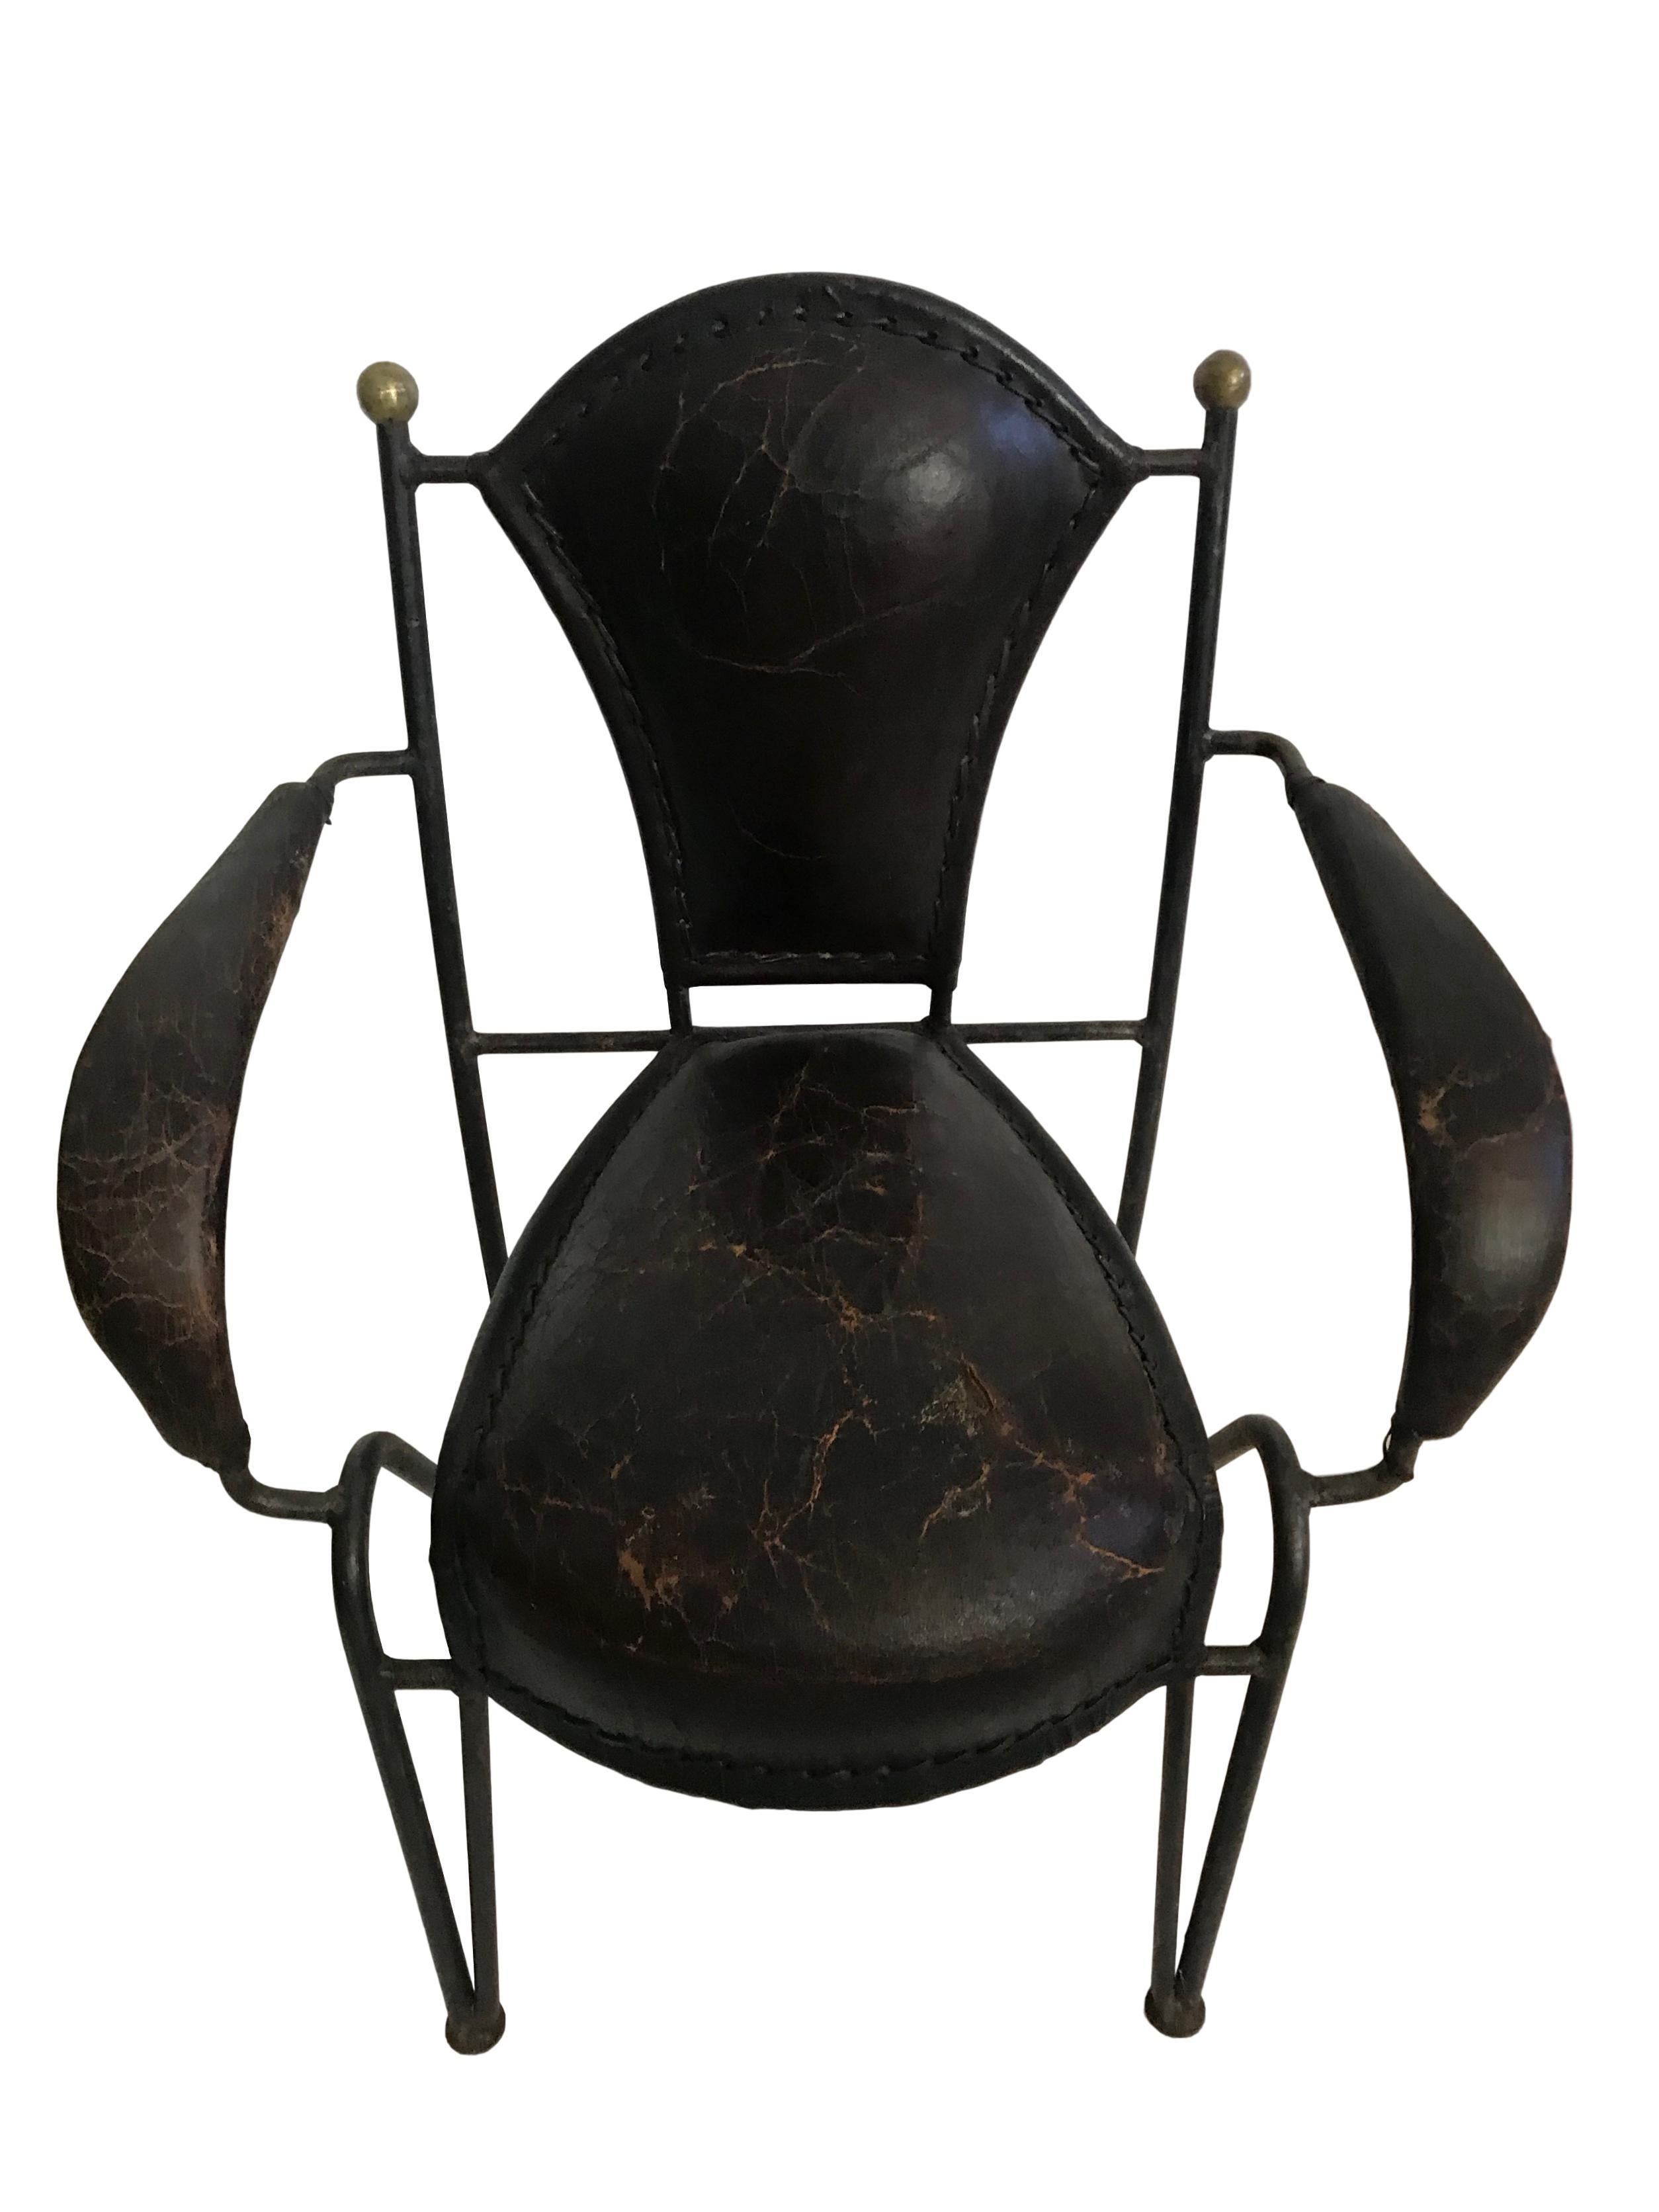 This is a unique pair of children's arm chairs with iron frame and leather seat and armrests. On the top of the backrest are gold overpainted knobs which add great character.